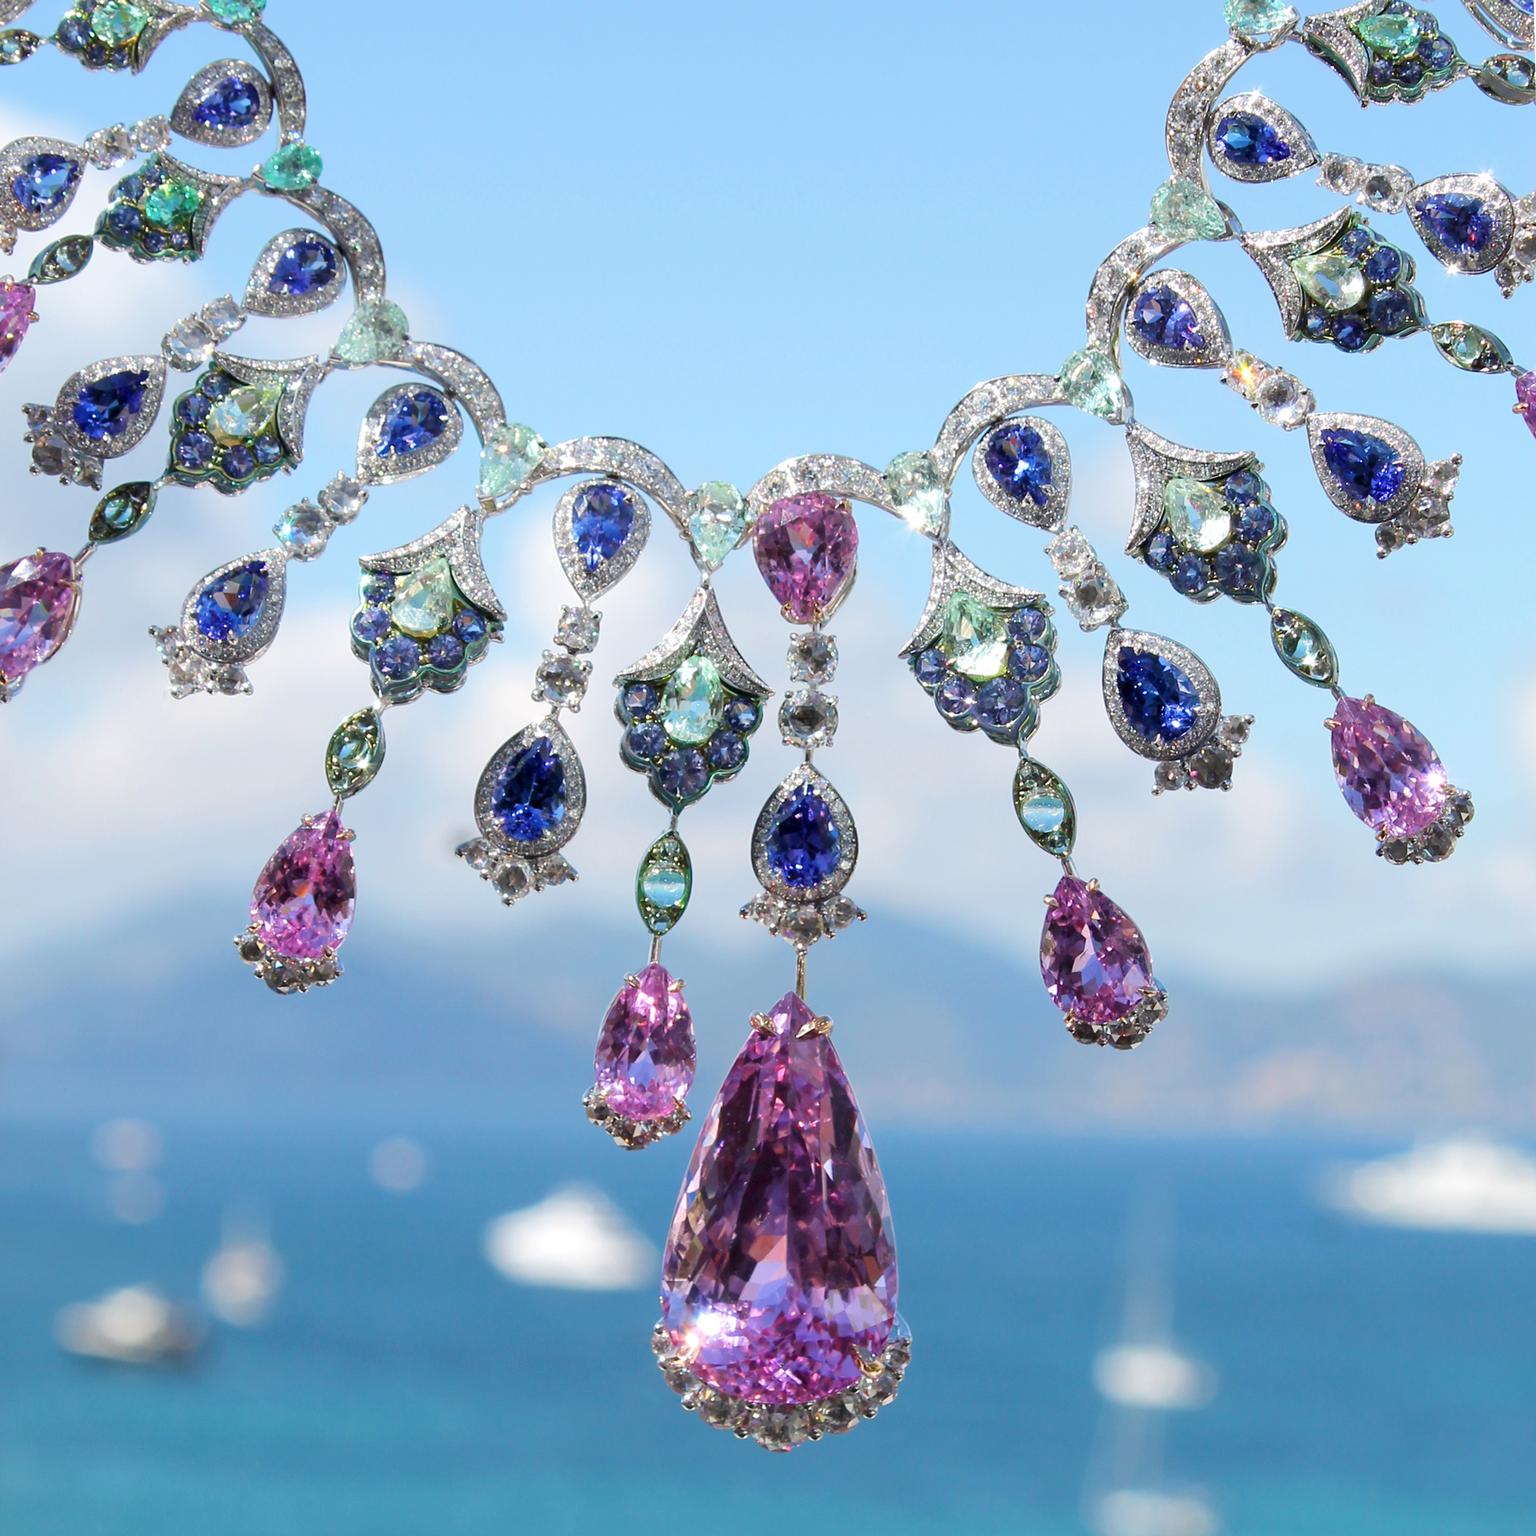 Chopard Red Carpet Collection kunzite necklace